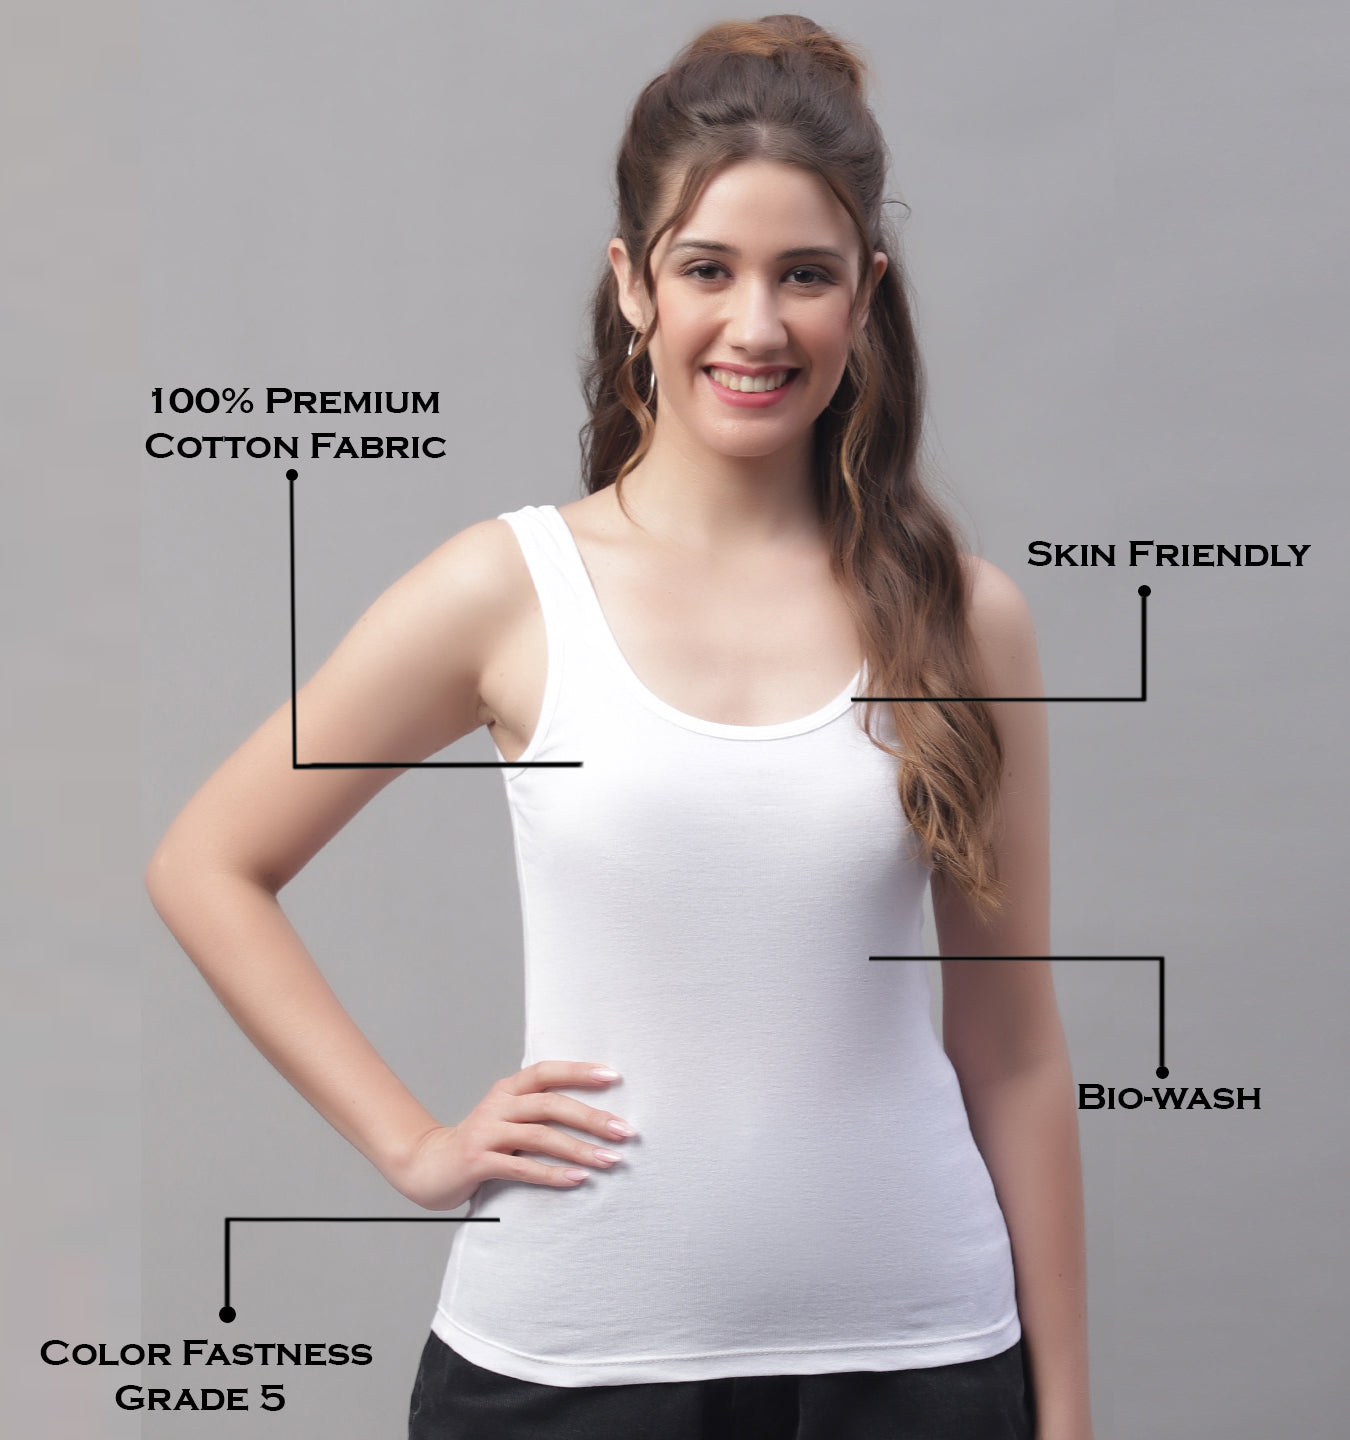 Cotton Tank Tops For Women. Casual Sleeveles Tank Top - Friskers